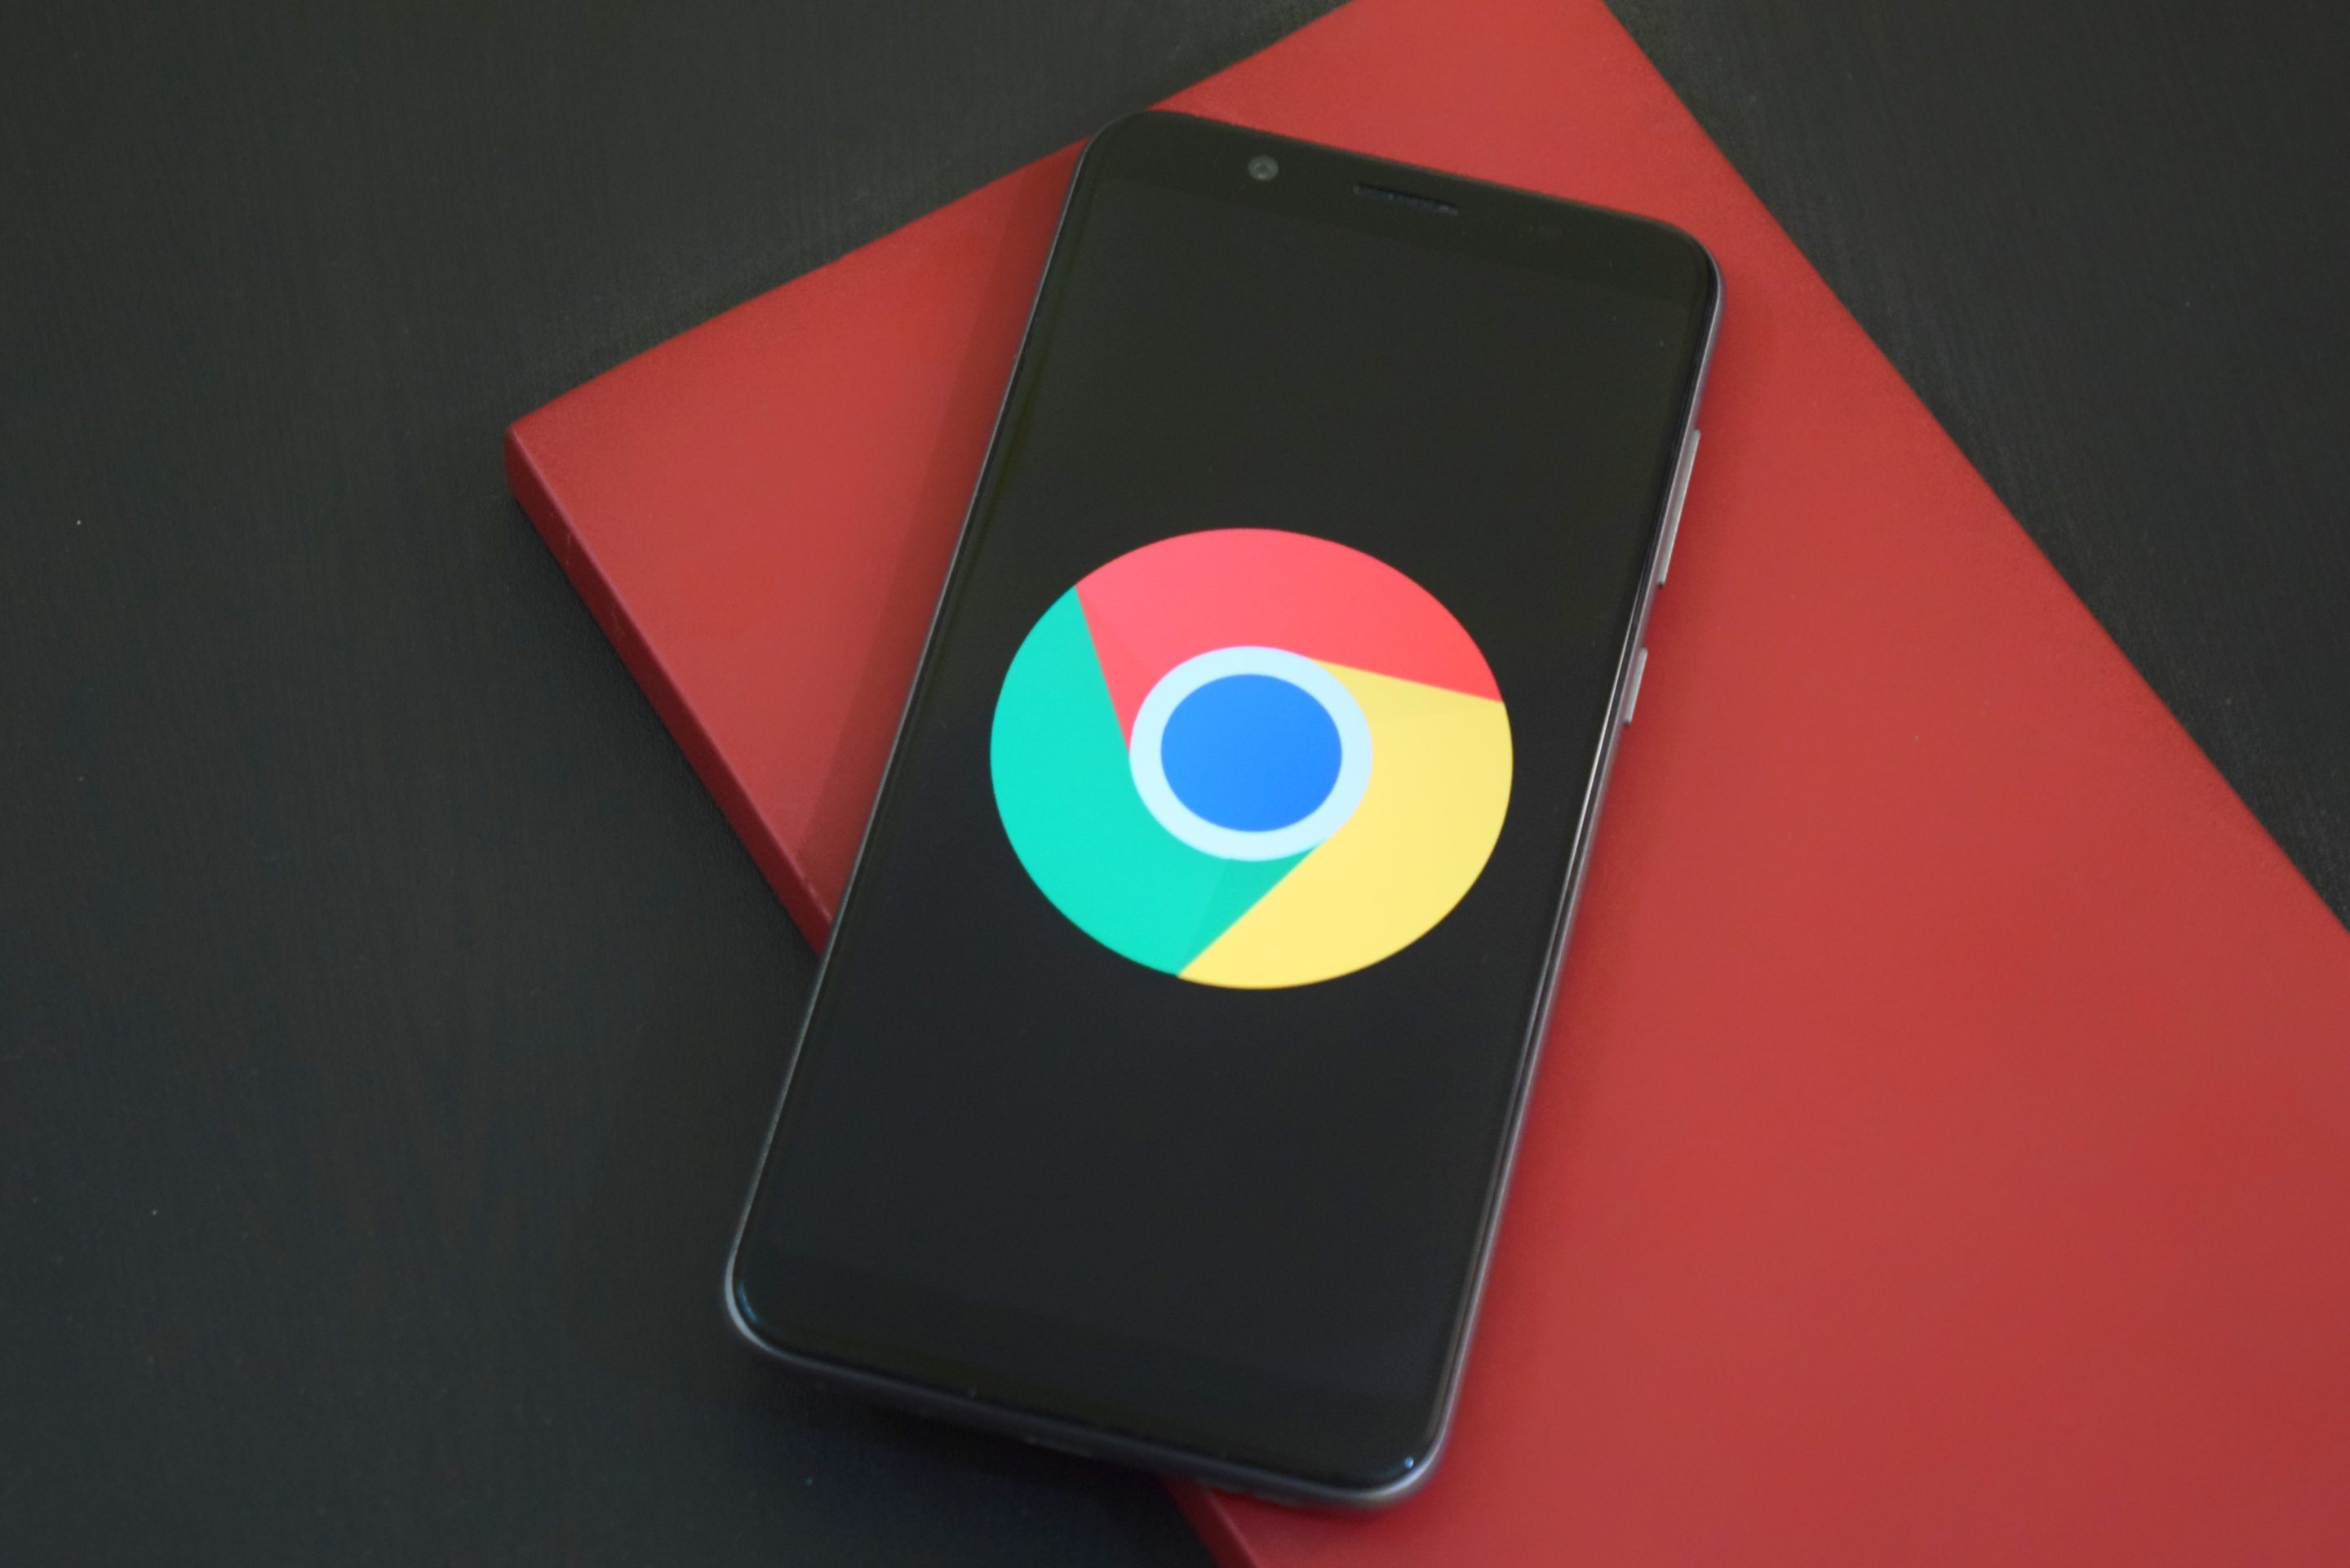 The google chrome logo is displayed on a mobile device.